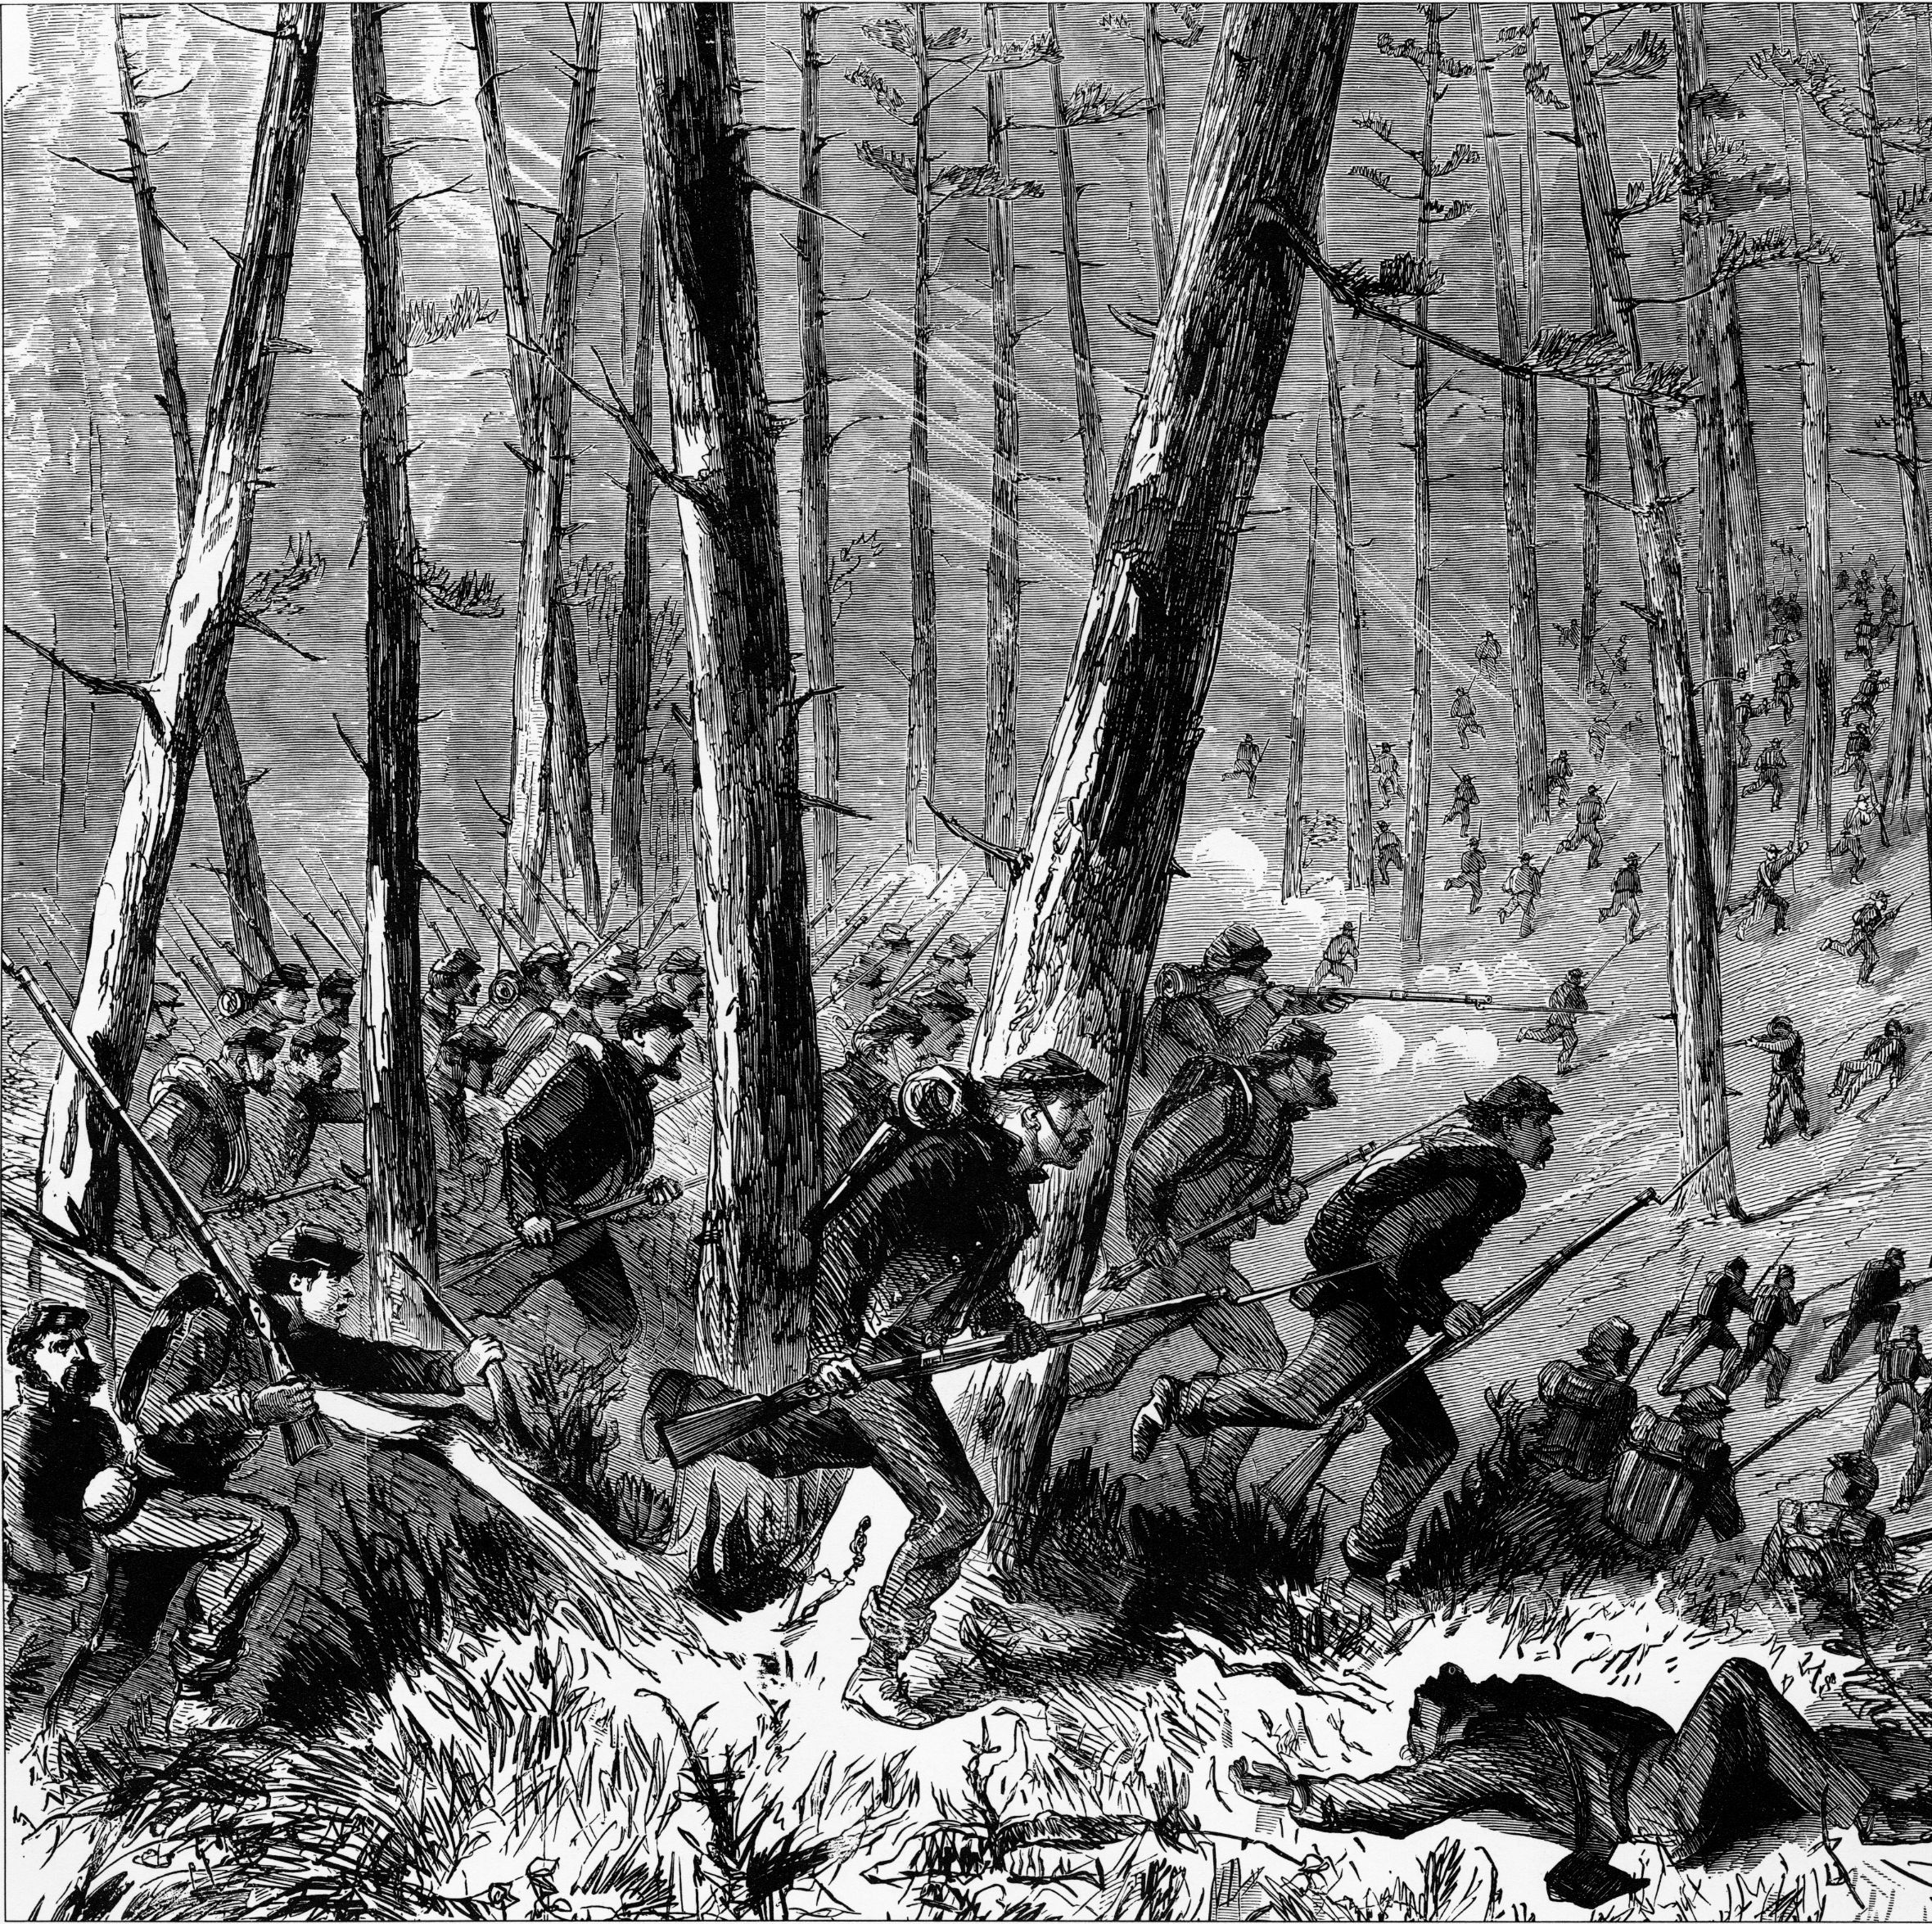 Deep ranks of Union troops advance at the double quick against outnumbered Confederates in the tangled woods south of Champion's Hill. The broken terrain south of the hill was cut up by ravines, hills, and forested tracts.